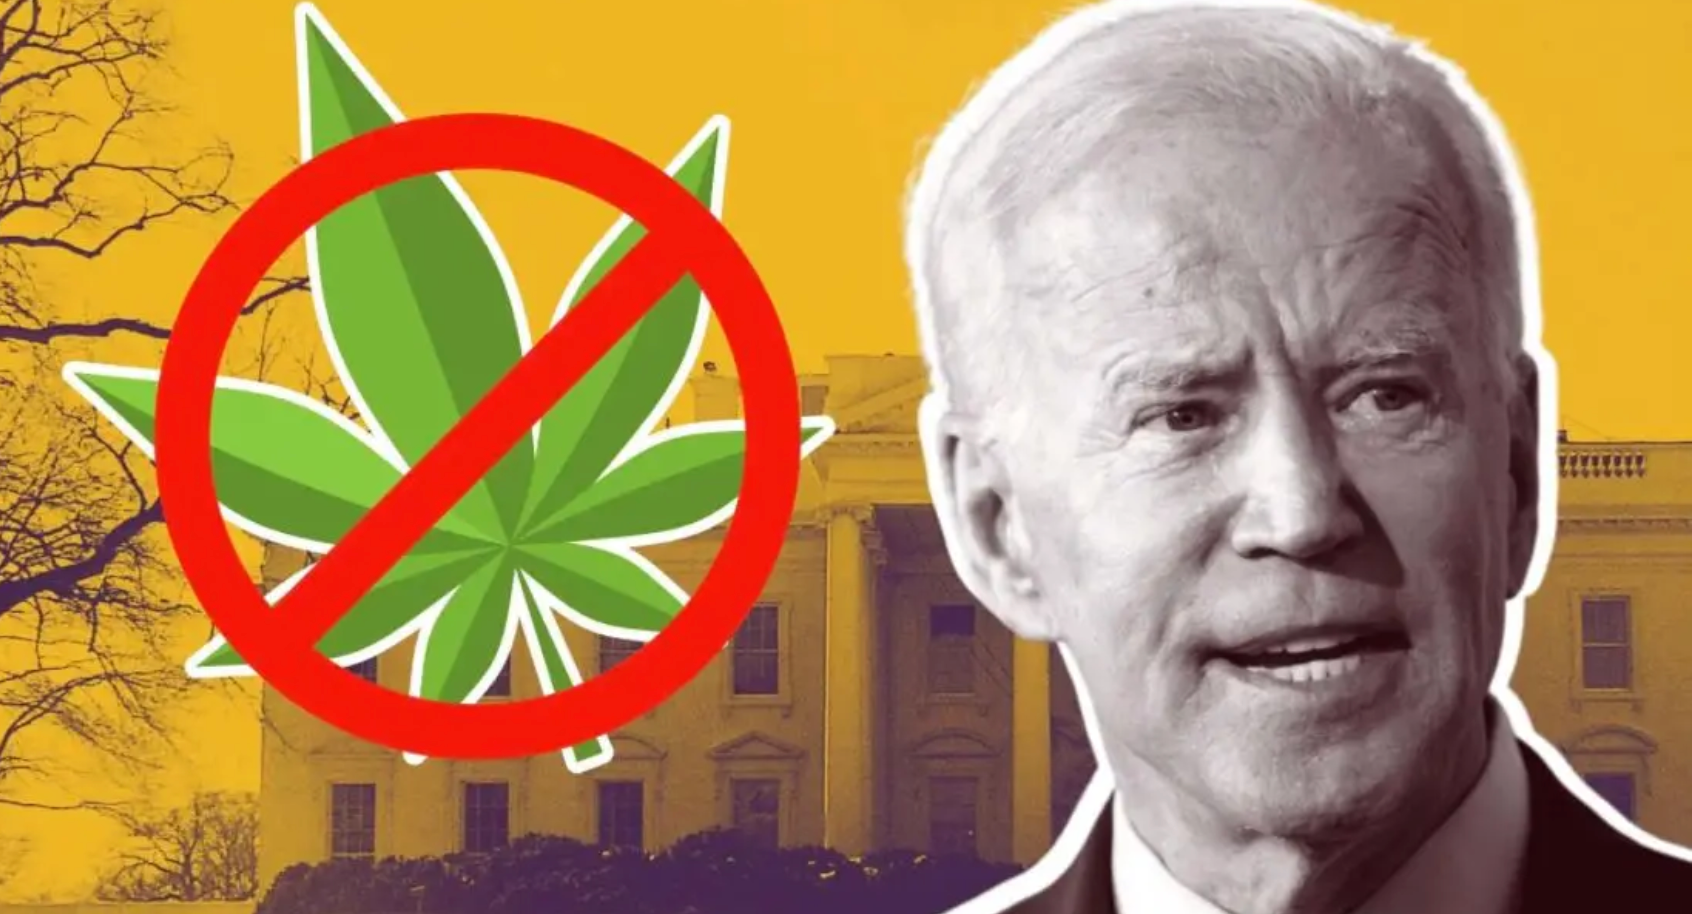 Why The Biden Administration Advises Applicants Not To Invest In Cannabis: 'Not Knowing Is Not An Excuse'